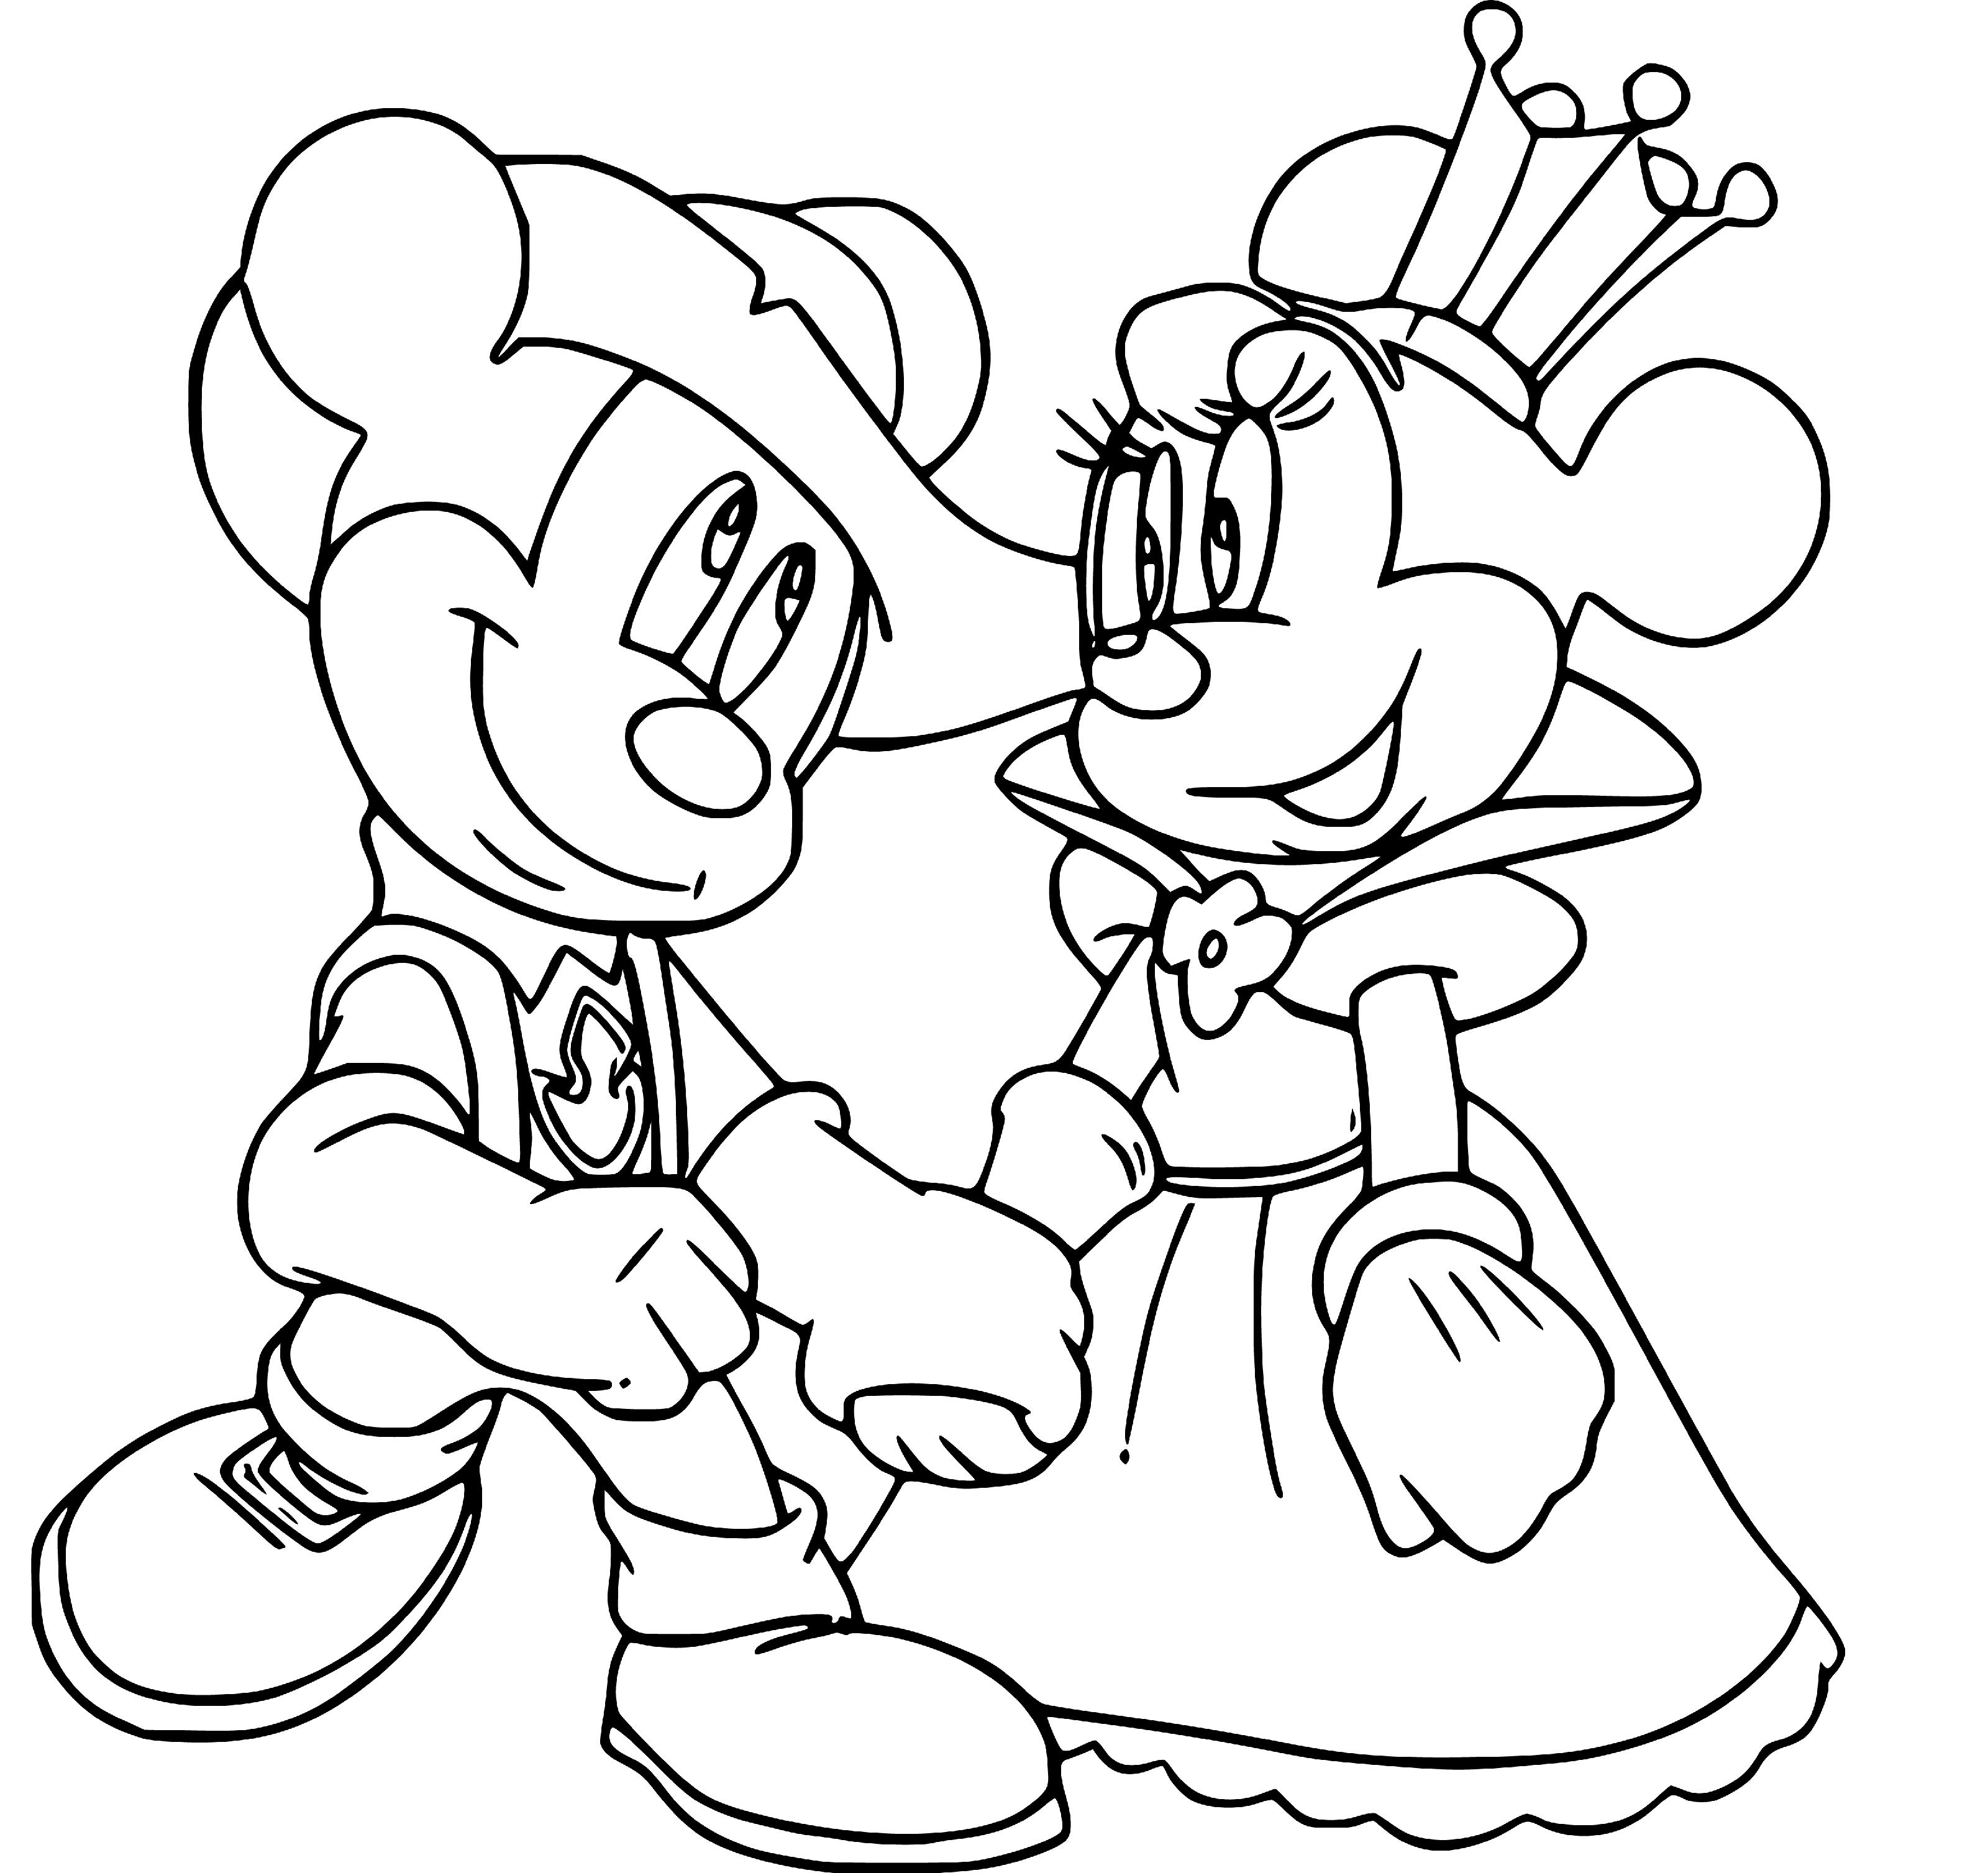 Printable Mickey and Minnie Mouse Coloring Page for kids.